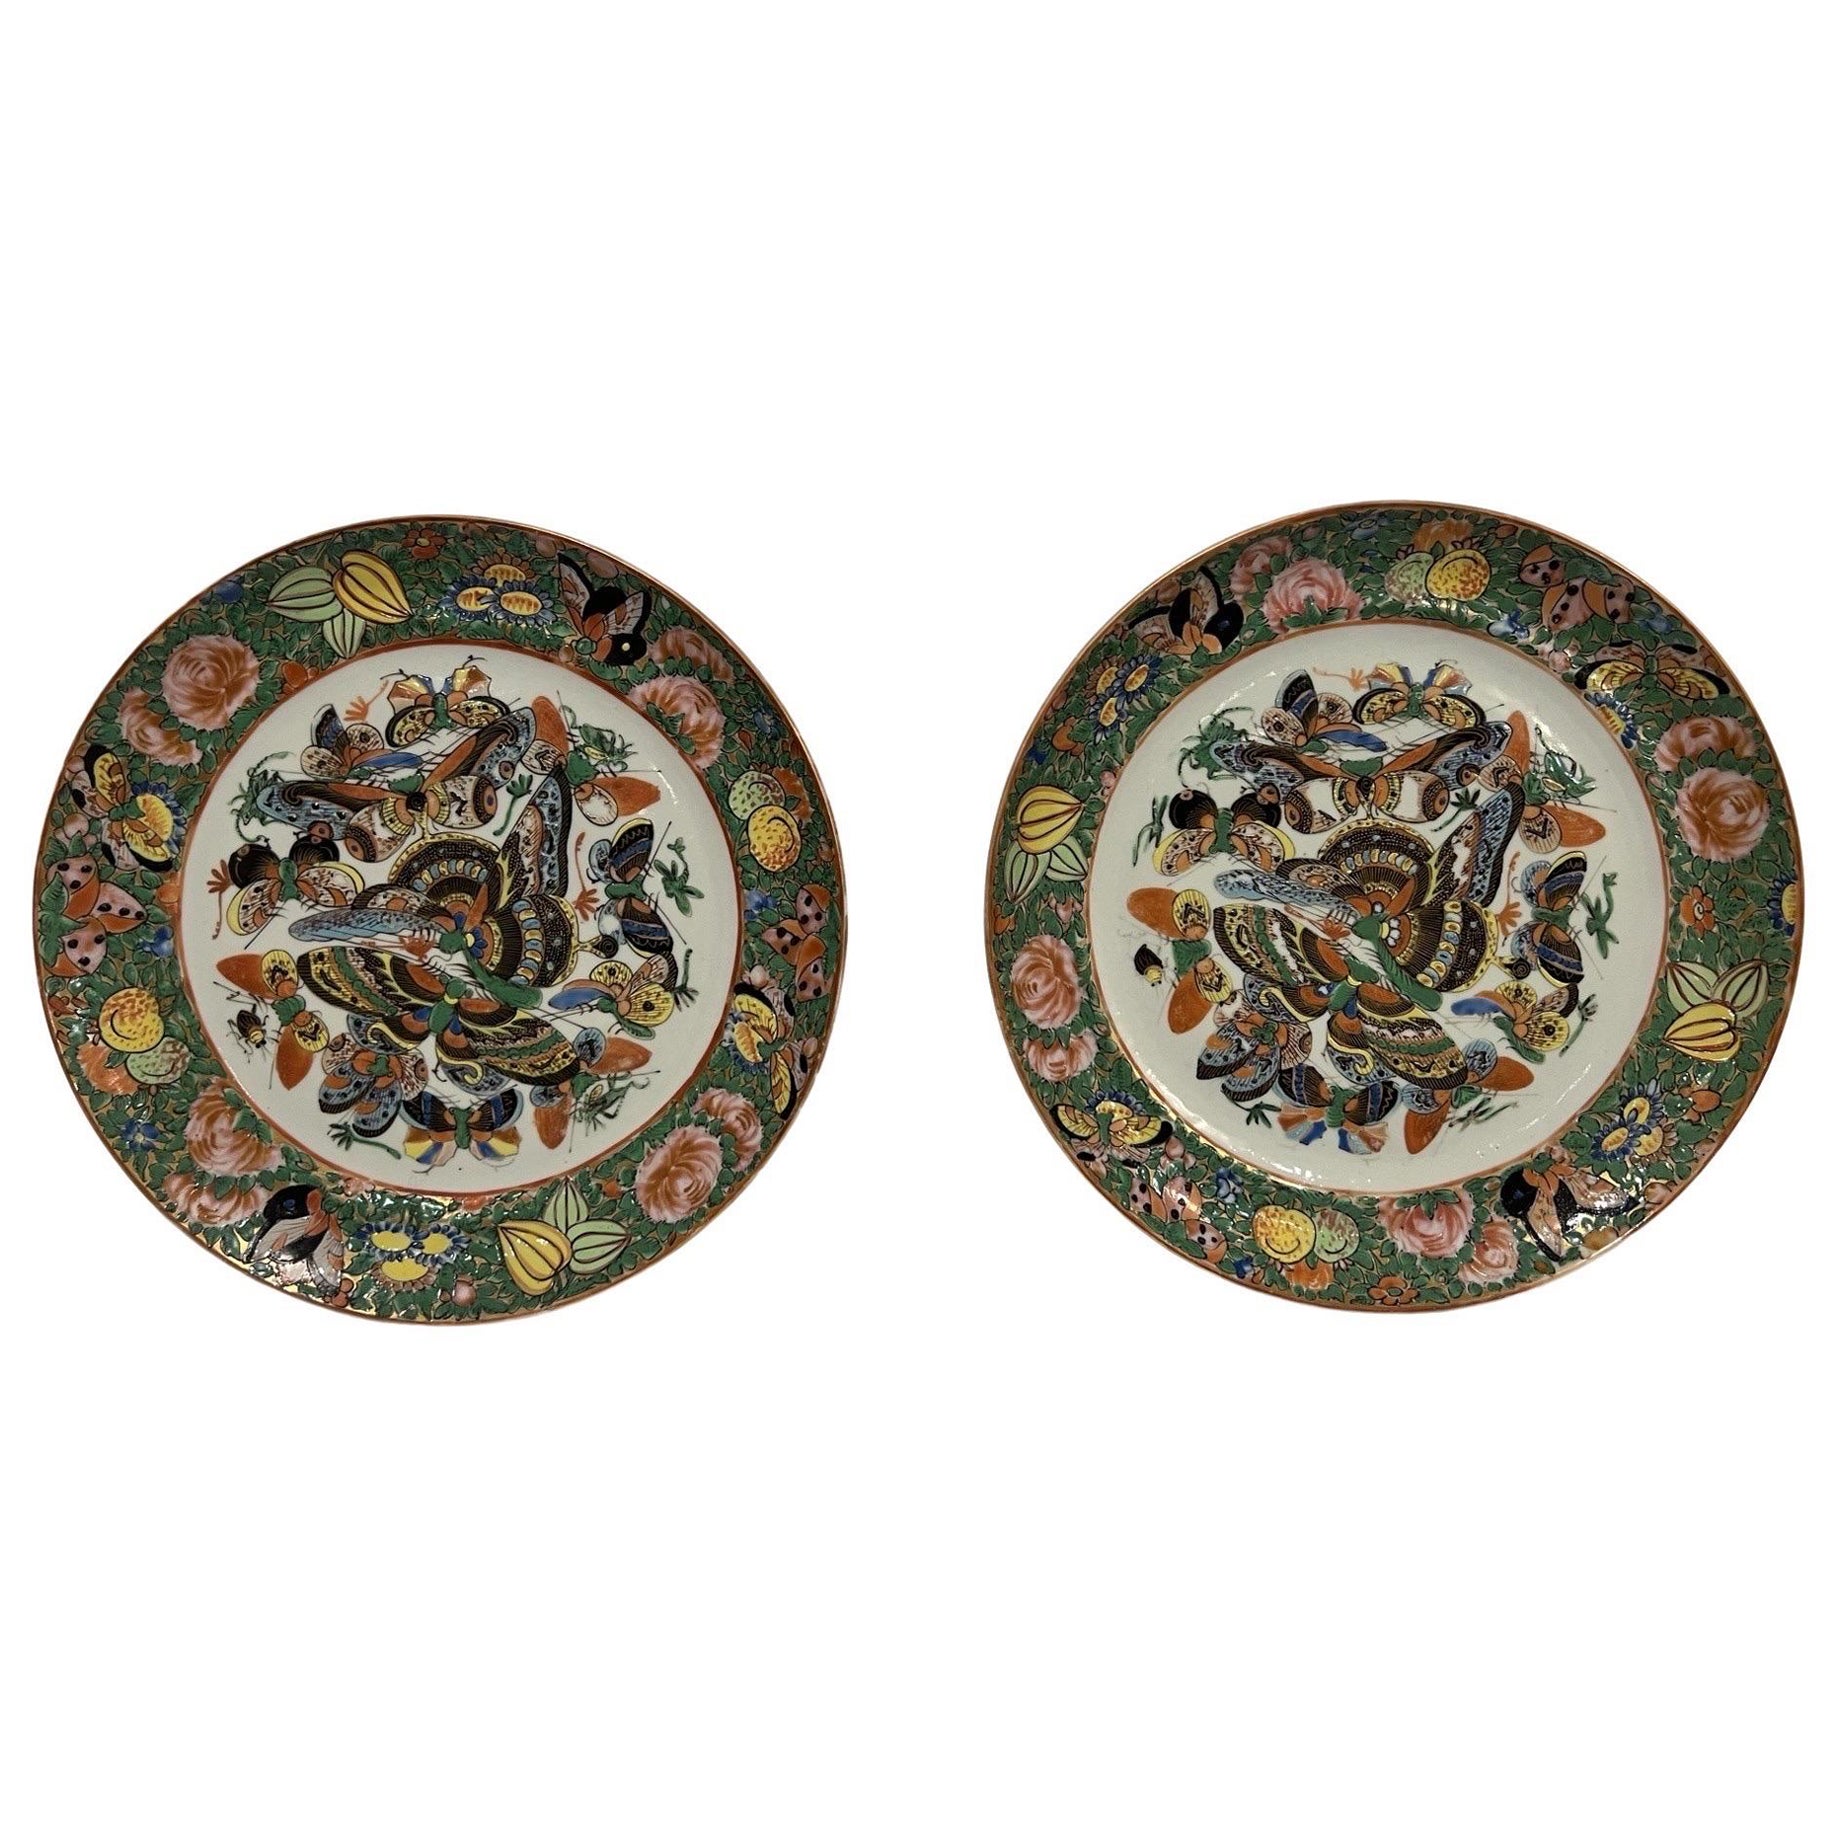 Pair, 19th Century Chinese Export "Thousand Butterfly" Porcelain Plates 9.5"